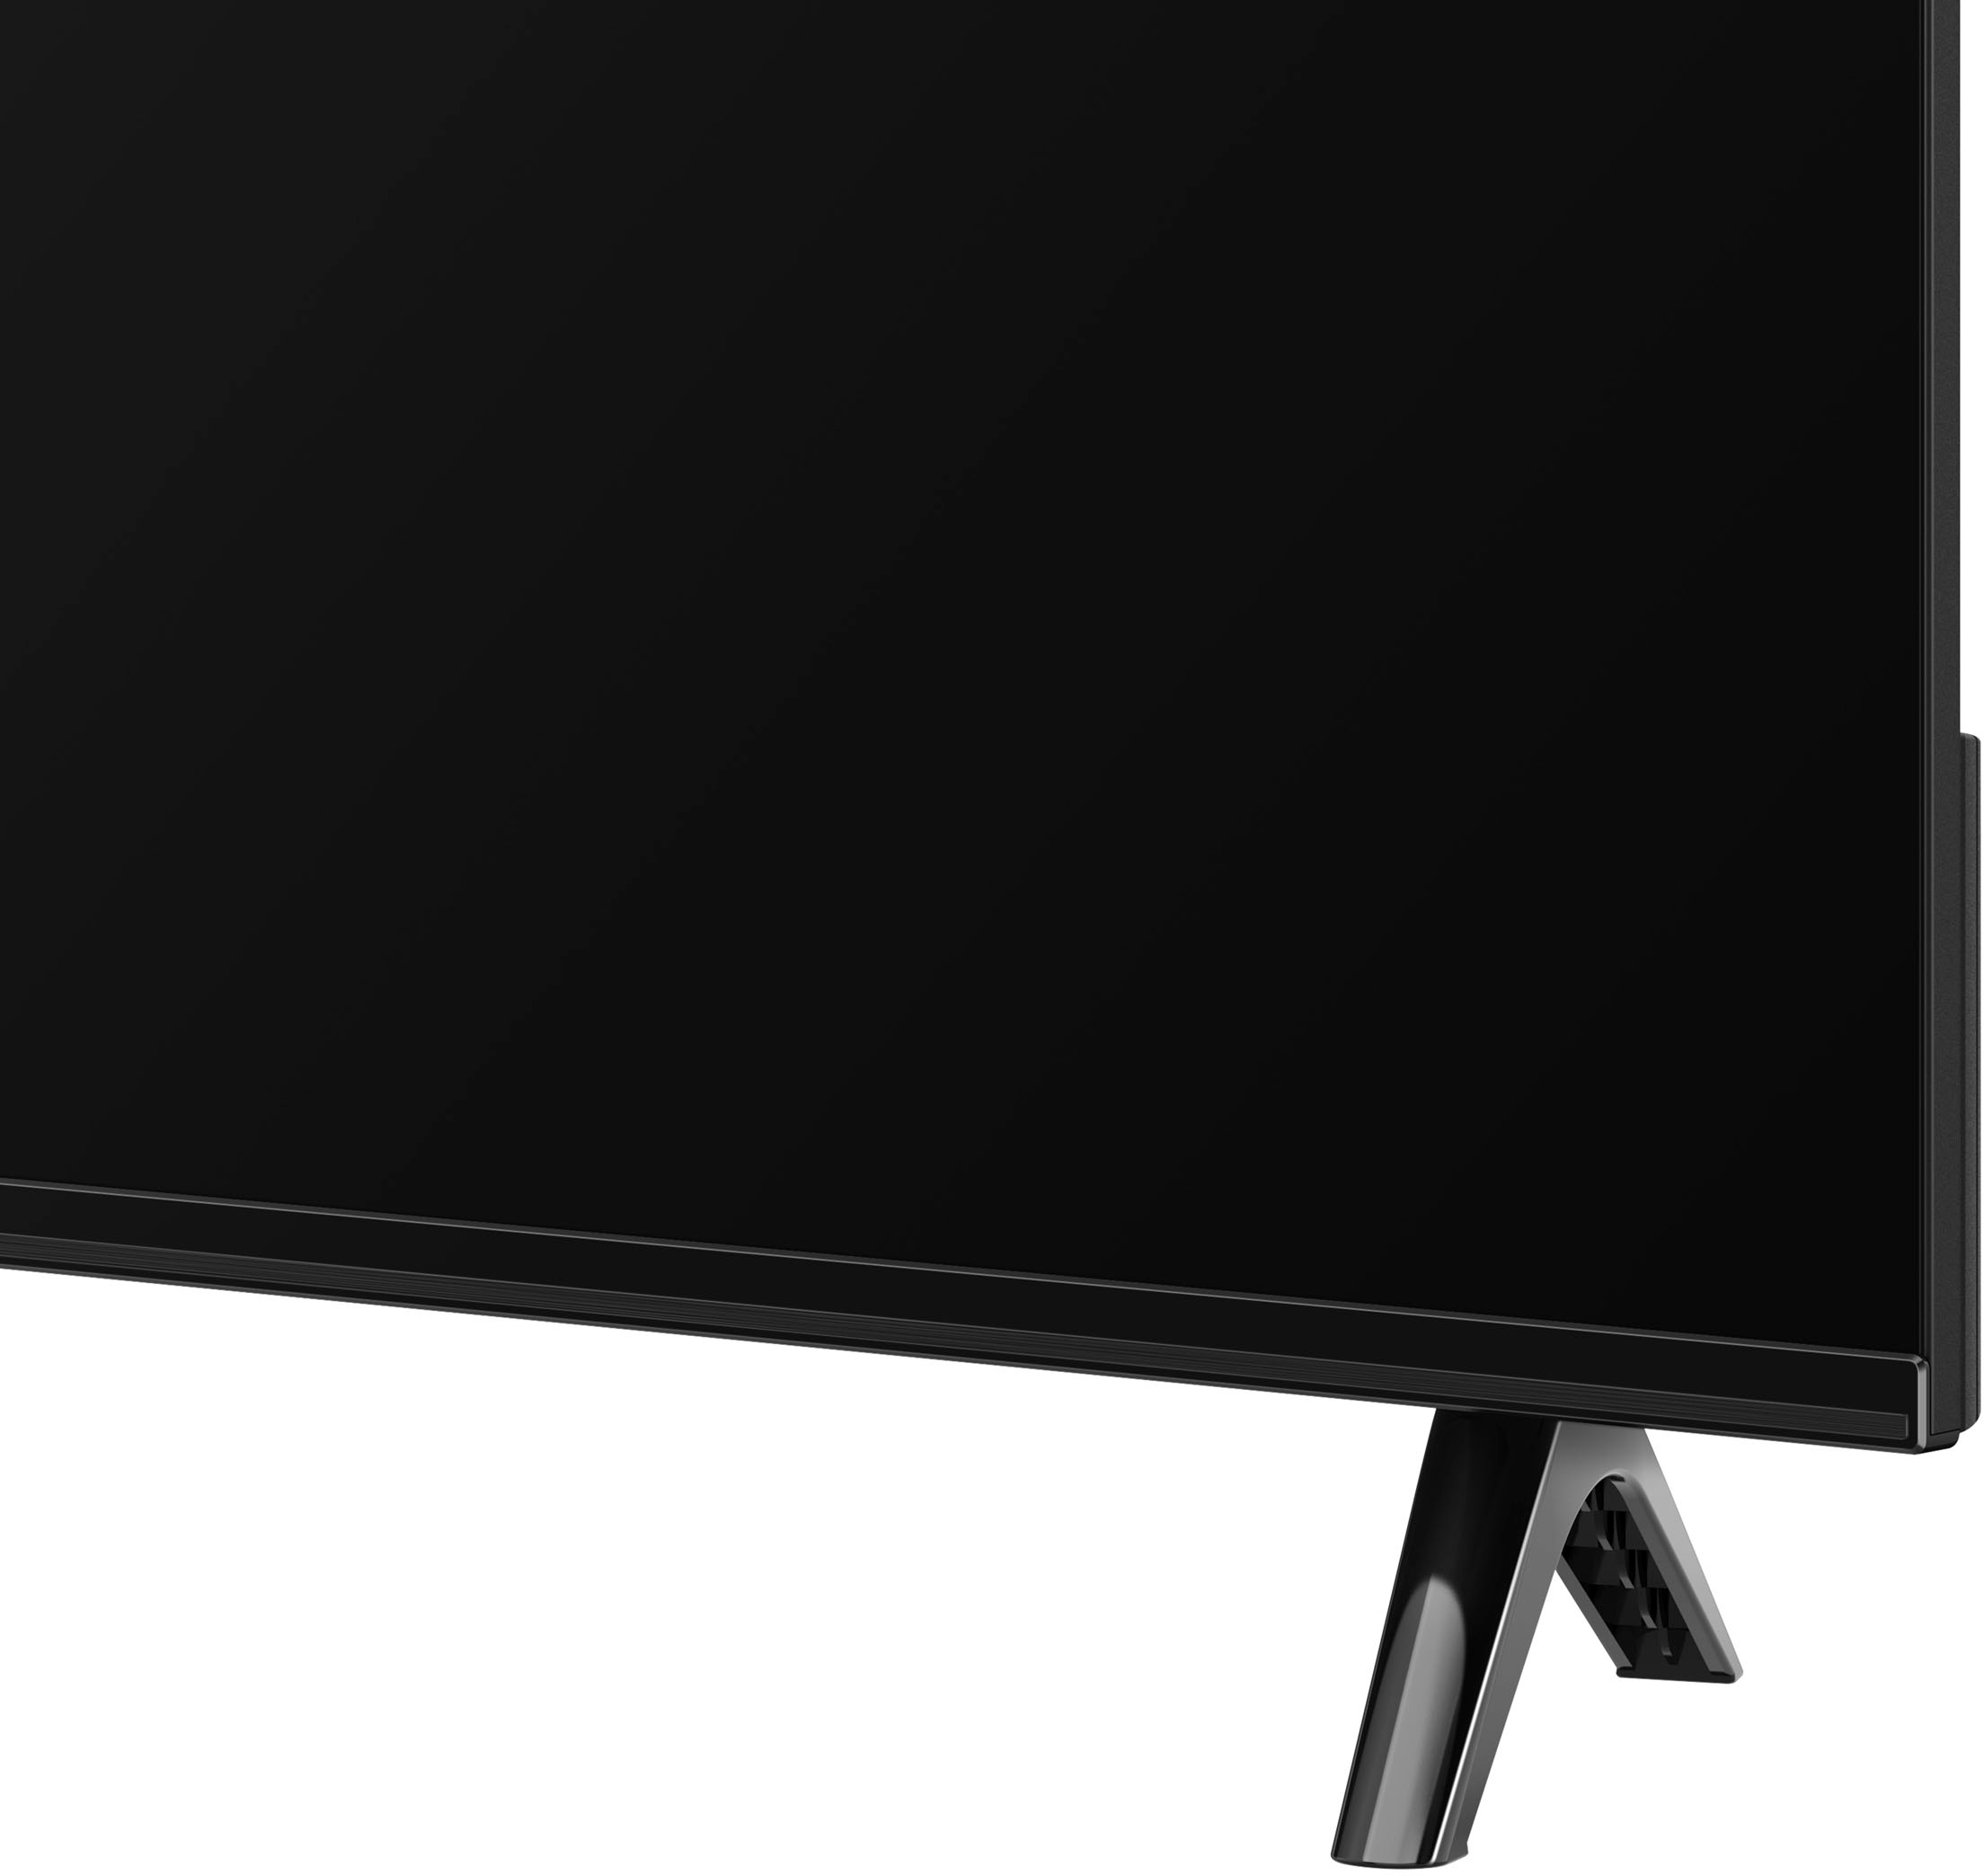 TCL 43” Class S Class 4K UHD HDR LED Smart TV with Google TV, 43S450G 